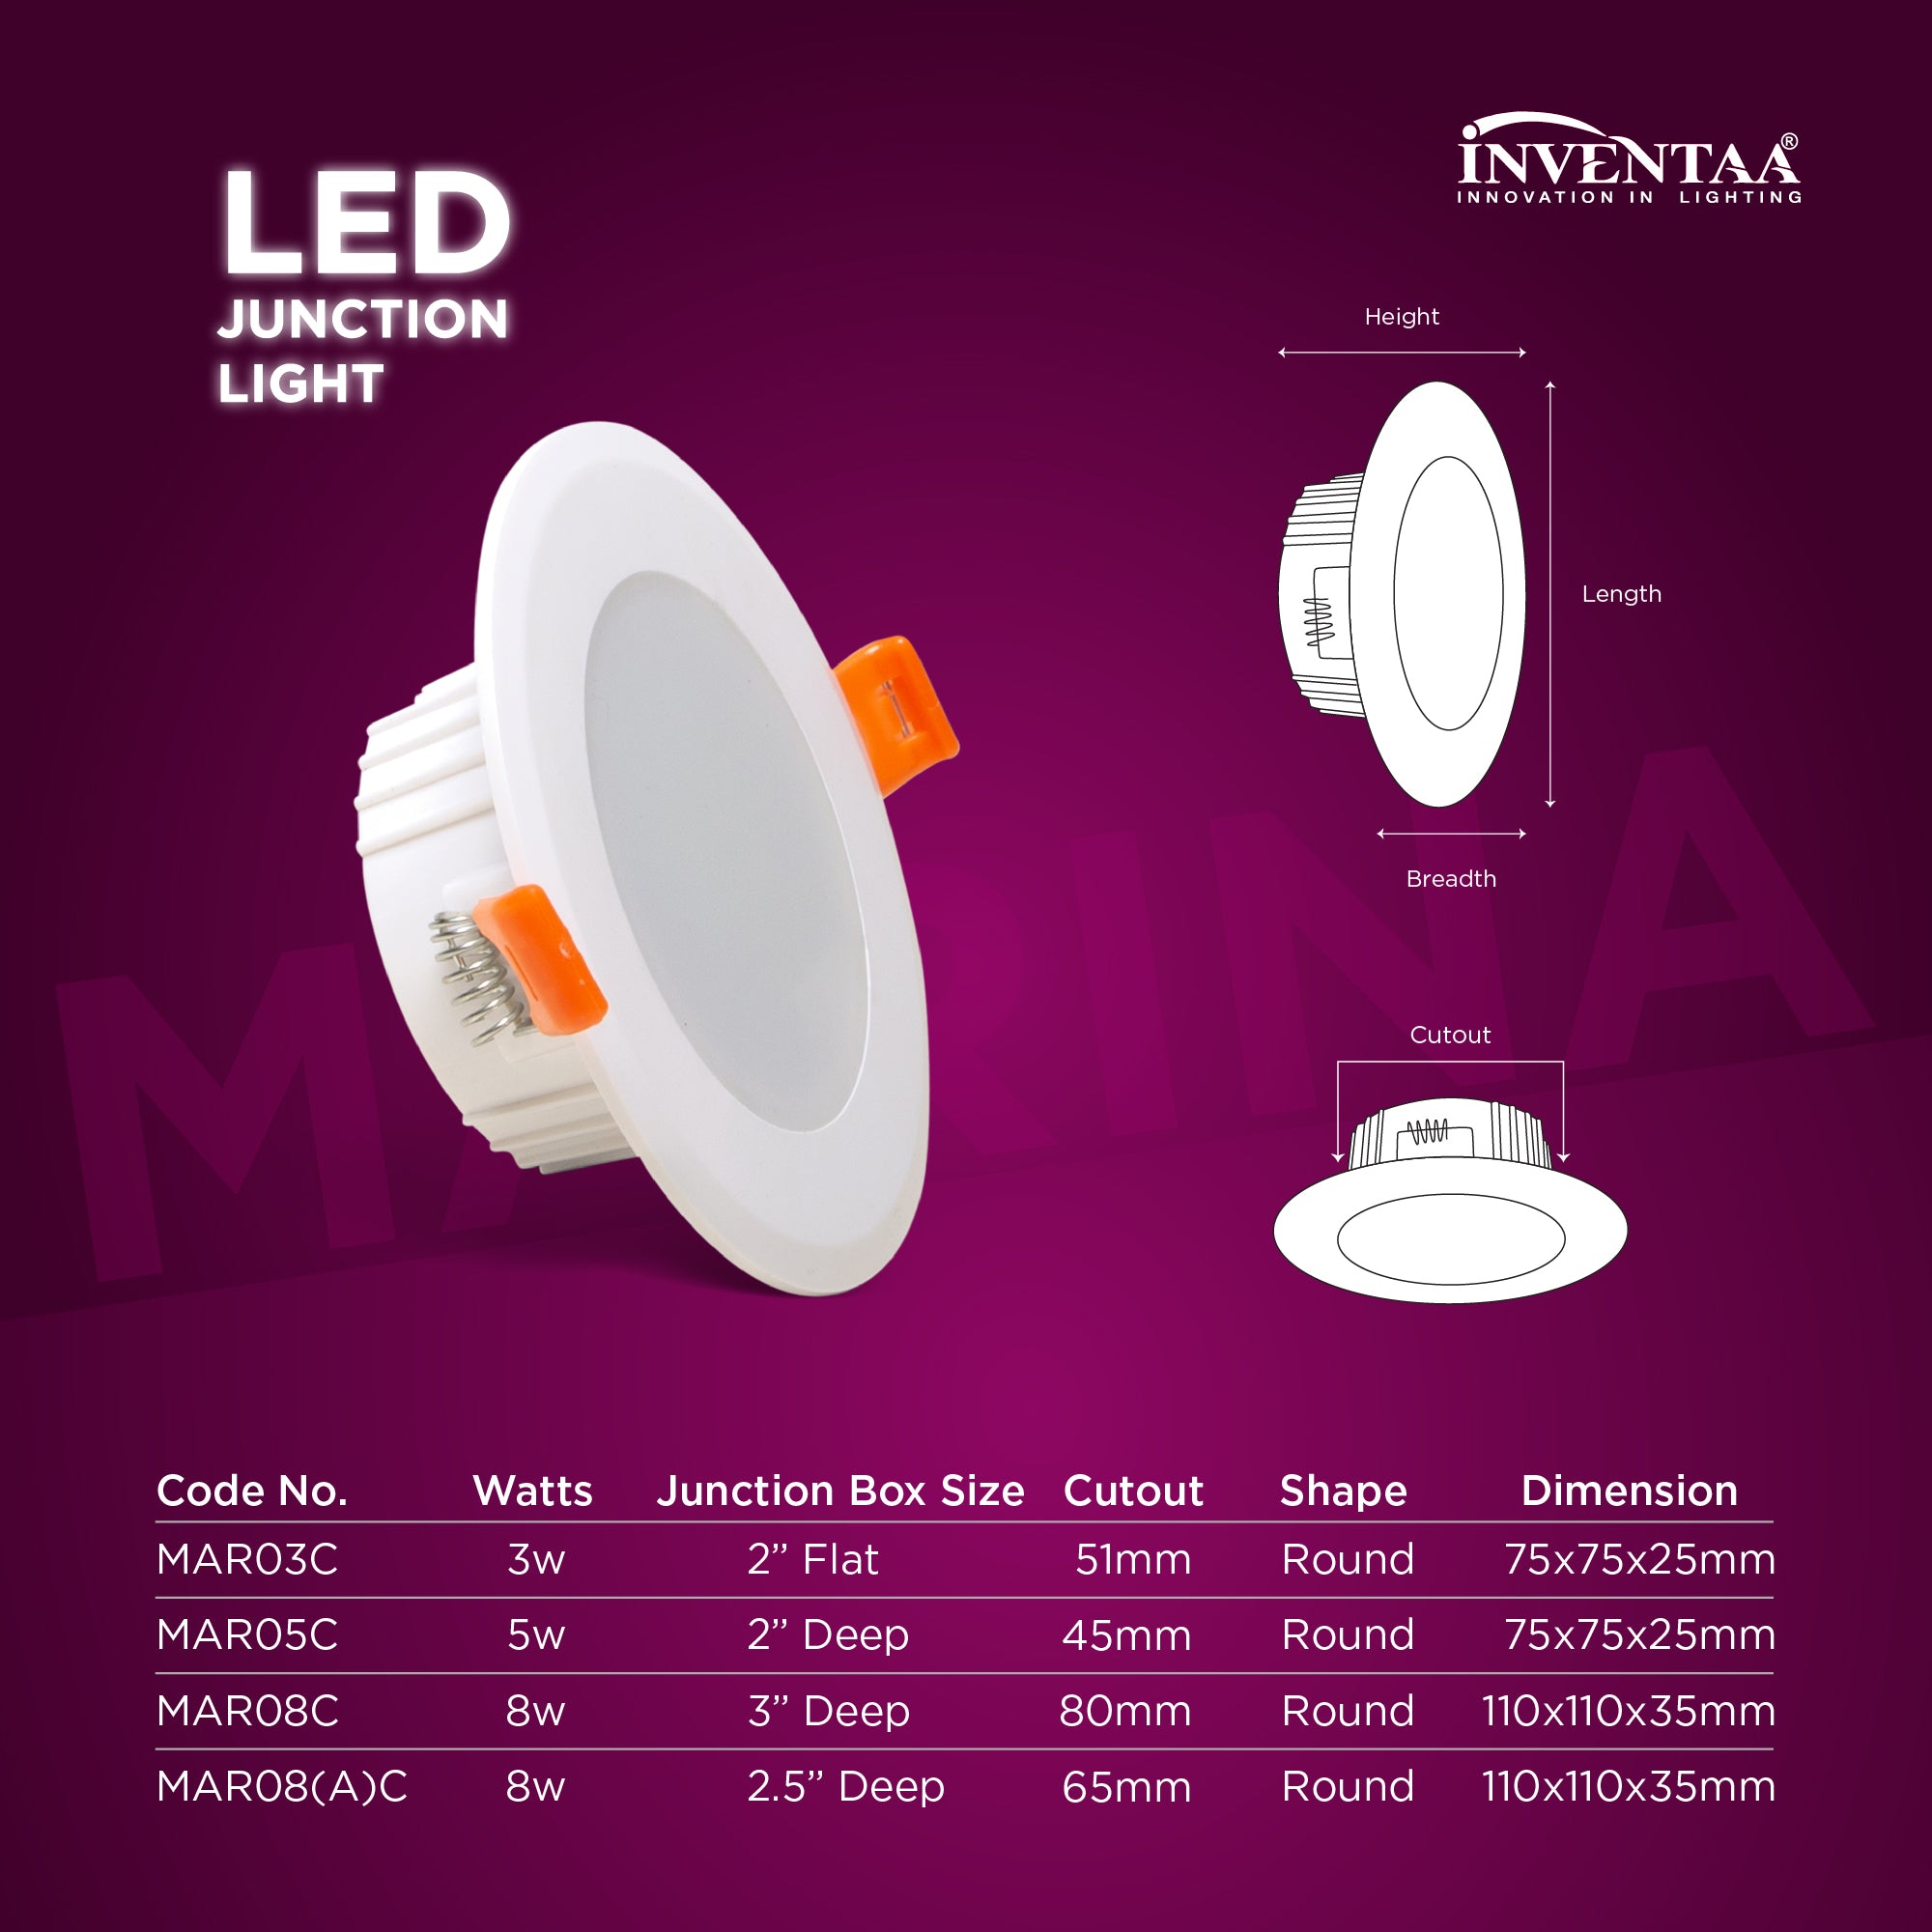 Dimension Of Marina 5W LED Junction Light #Suitable For_2 inch Deep Junction Box